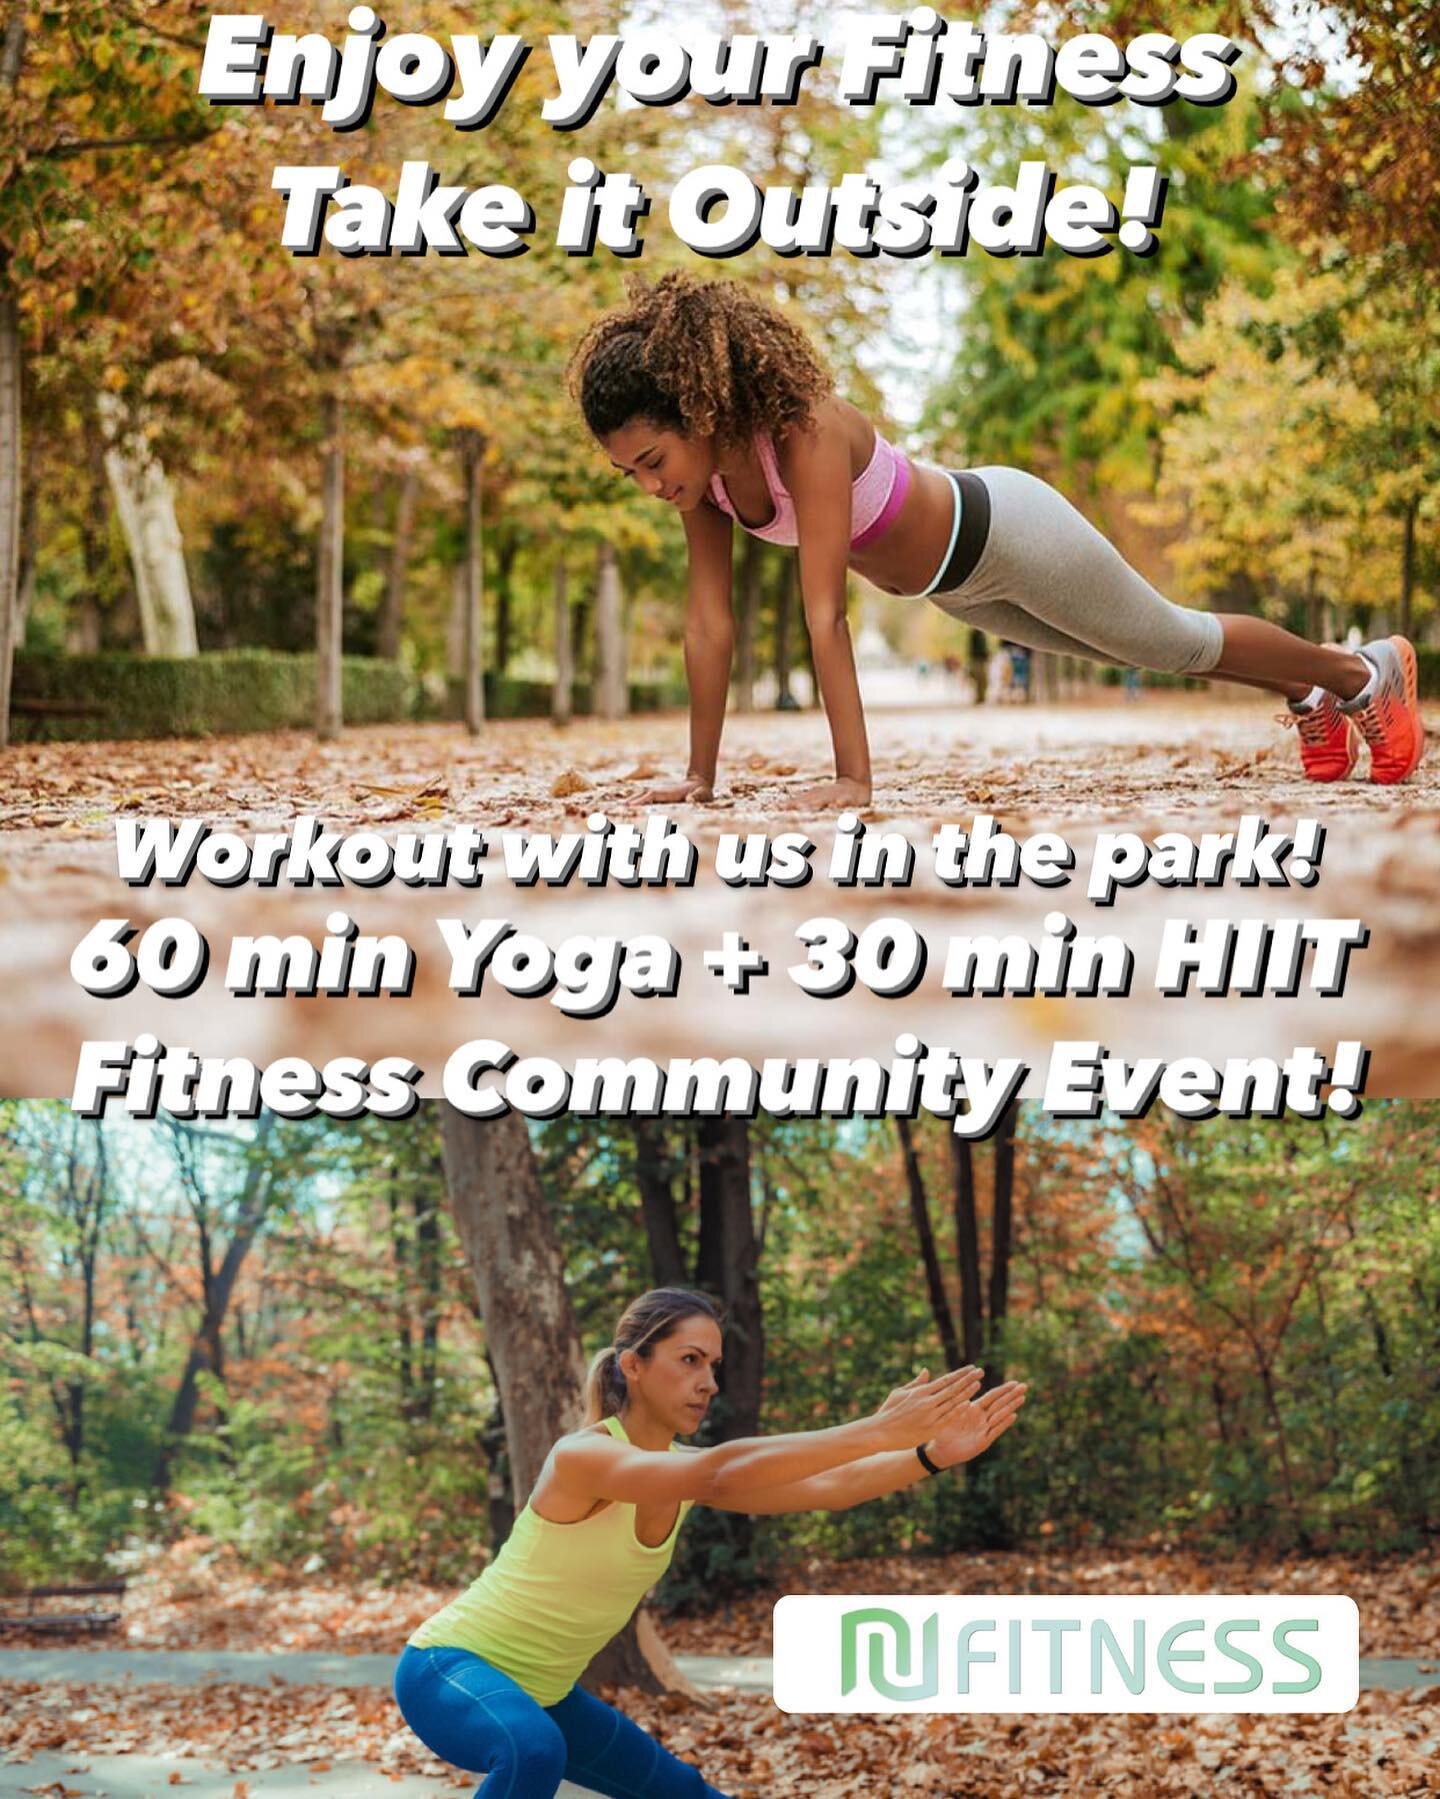 Come workout in the park with us! 🧘🏋️
Join us for 60 minutes yoga followed by 30 minutes HIIT Saturday, May 27 at noon at Cedar Rose Park in Berkeley!  Yoga provided by @outdooryogaberkeley and HIIT by @nufit_training team member @fit_habt !  One o